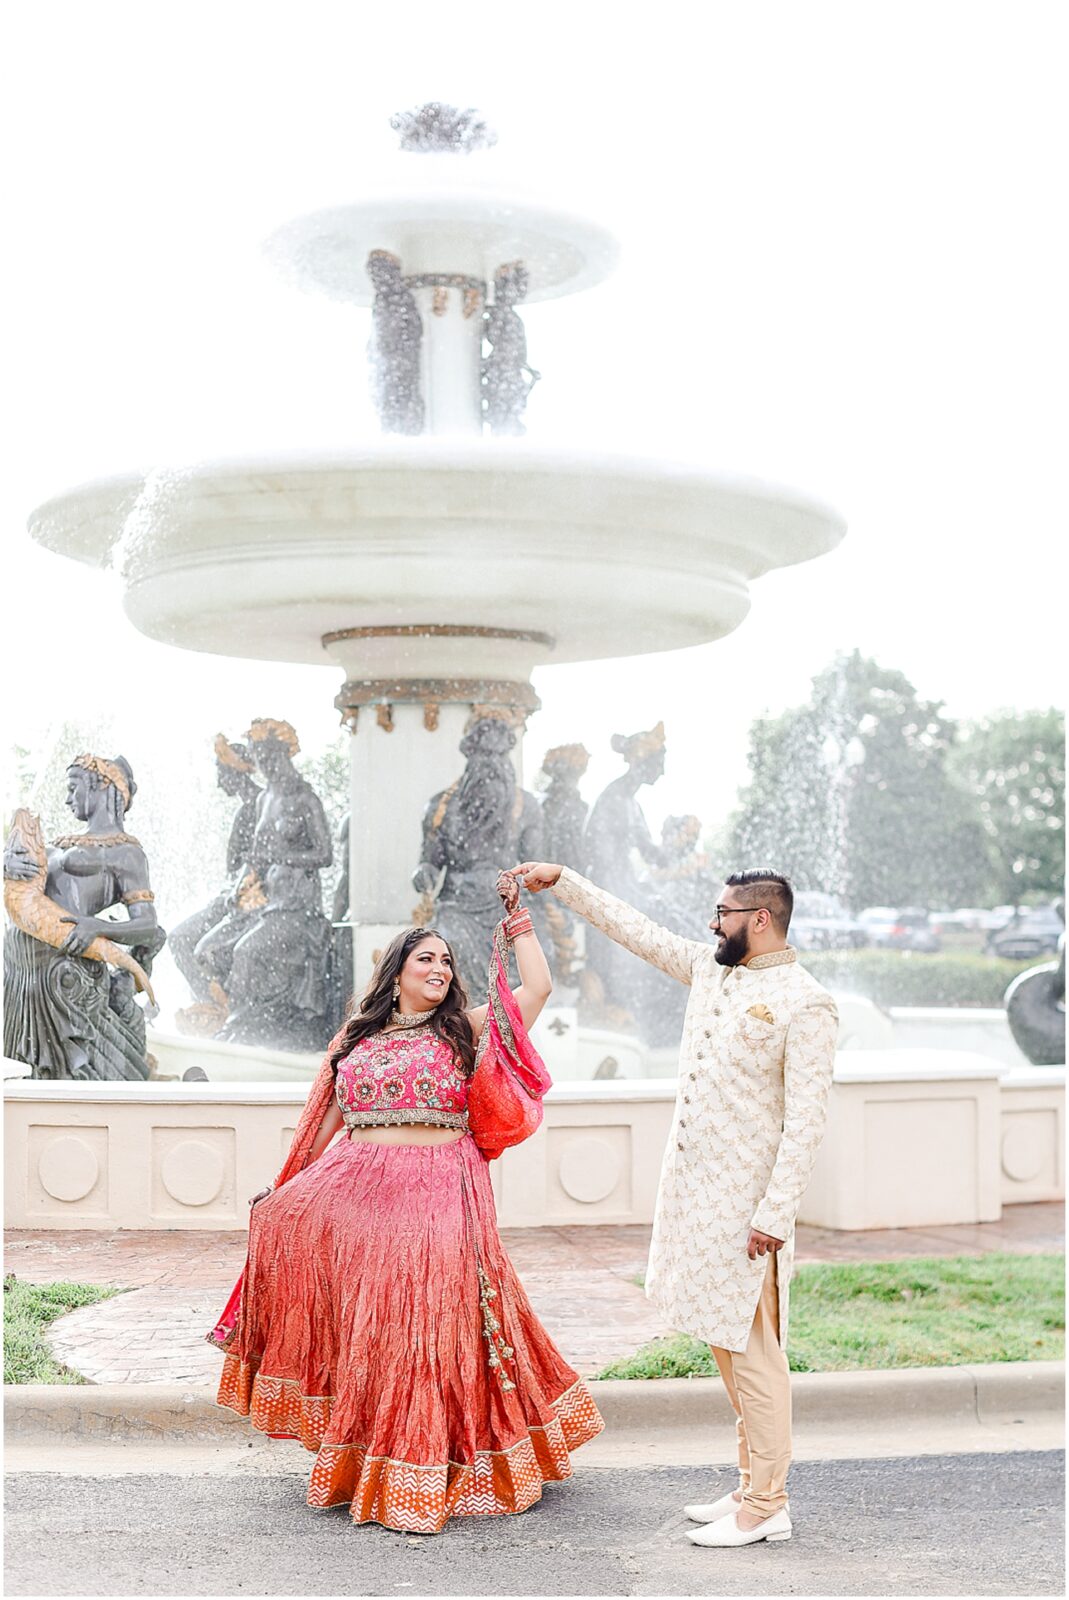 avent orangery fountain photo | pink indian outfit Indian Wedding Sangeet Party at Avent Orangery by Mariam Saifan Photography | Kansas City & STL Indian Wedding Photographer | Colorful Sangeet Decoration Ideas | Wedding at Avent Orangery 